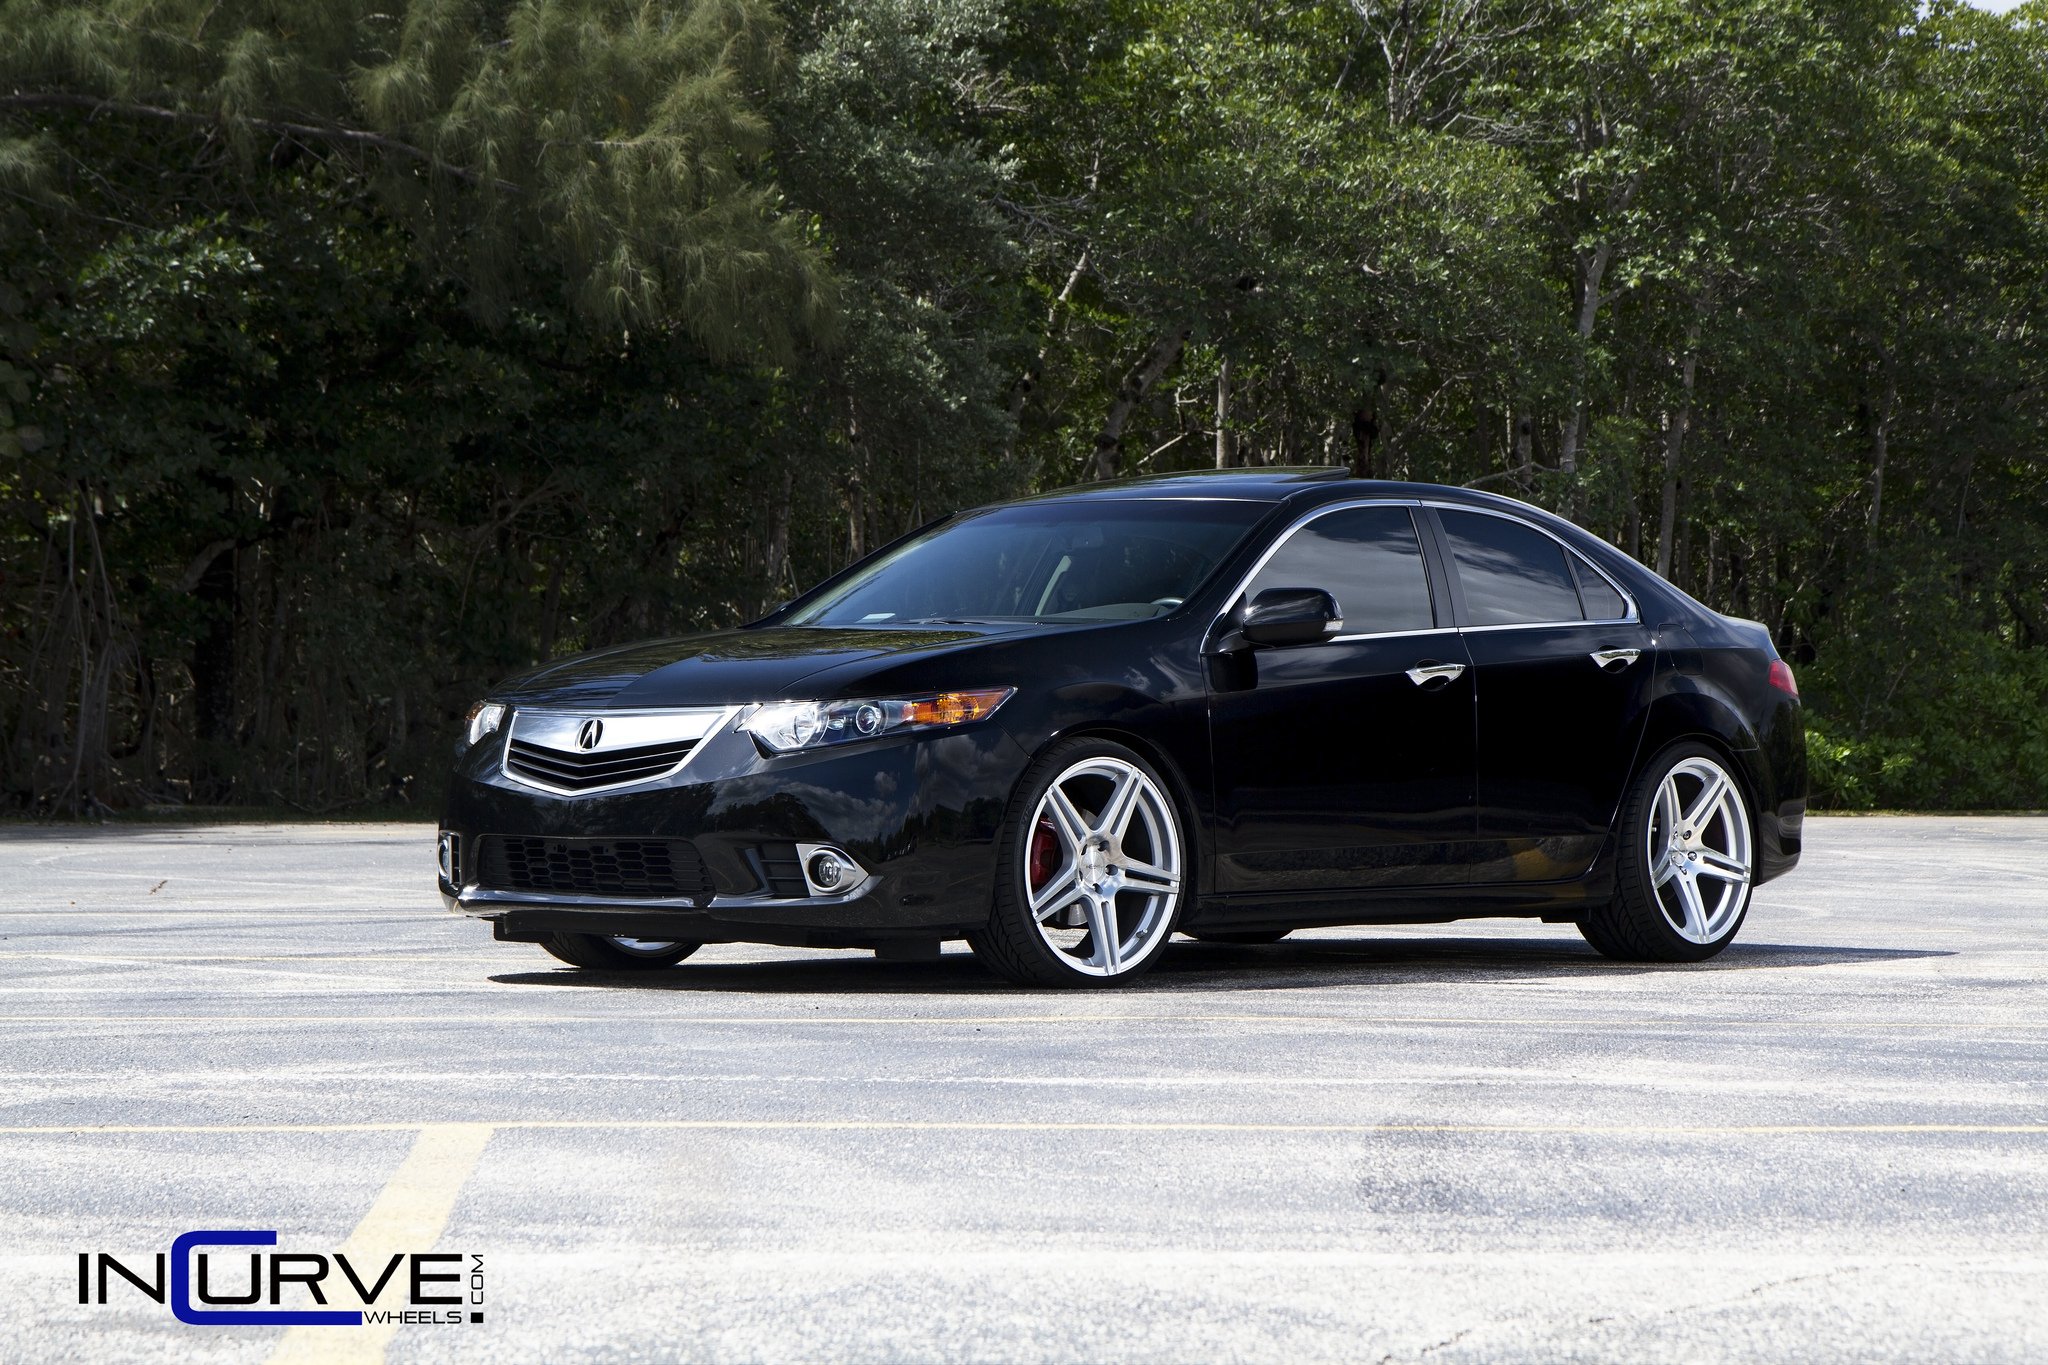 2015, Incurve, Wheels, Cars, Tuning, Acura, Tsx Wallpaper